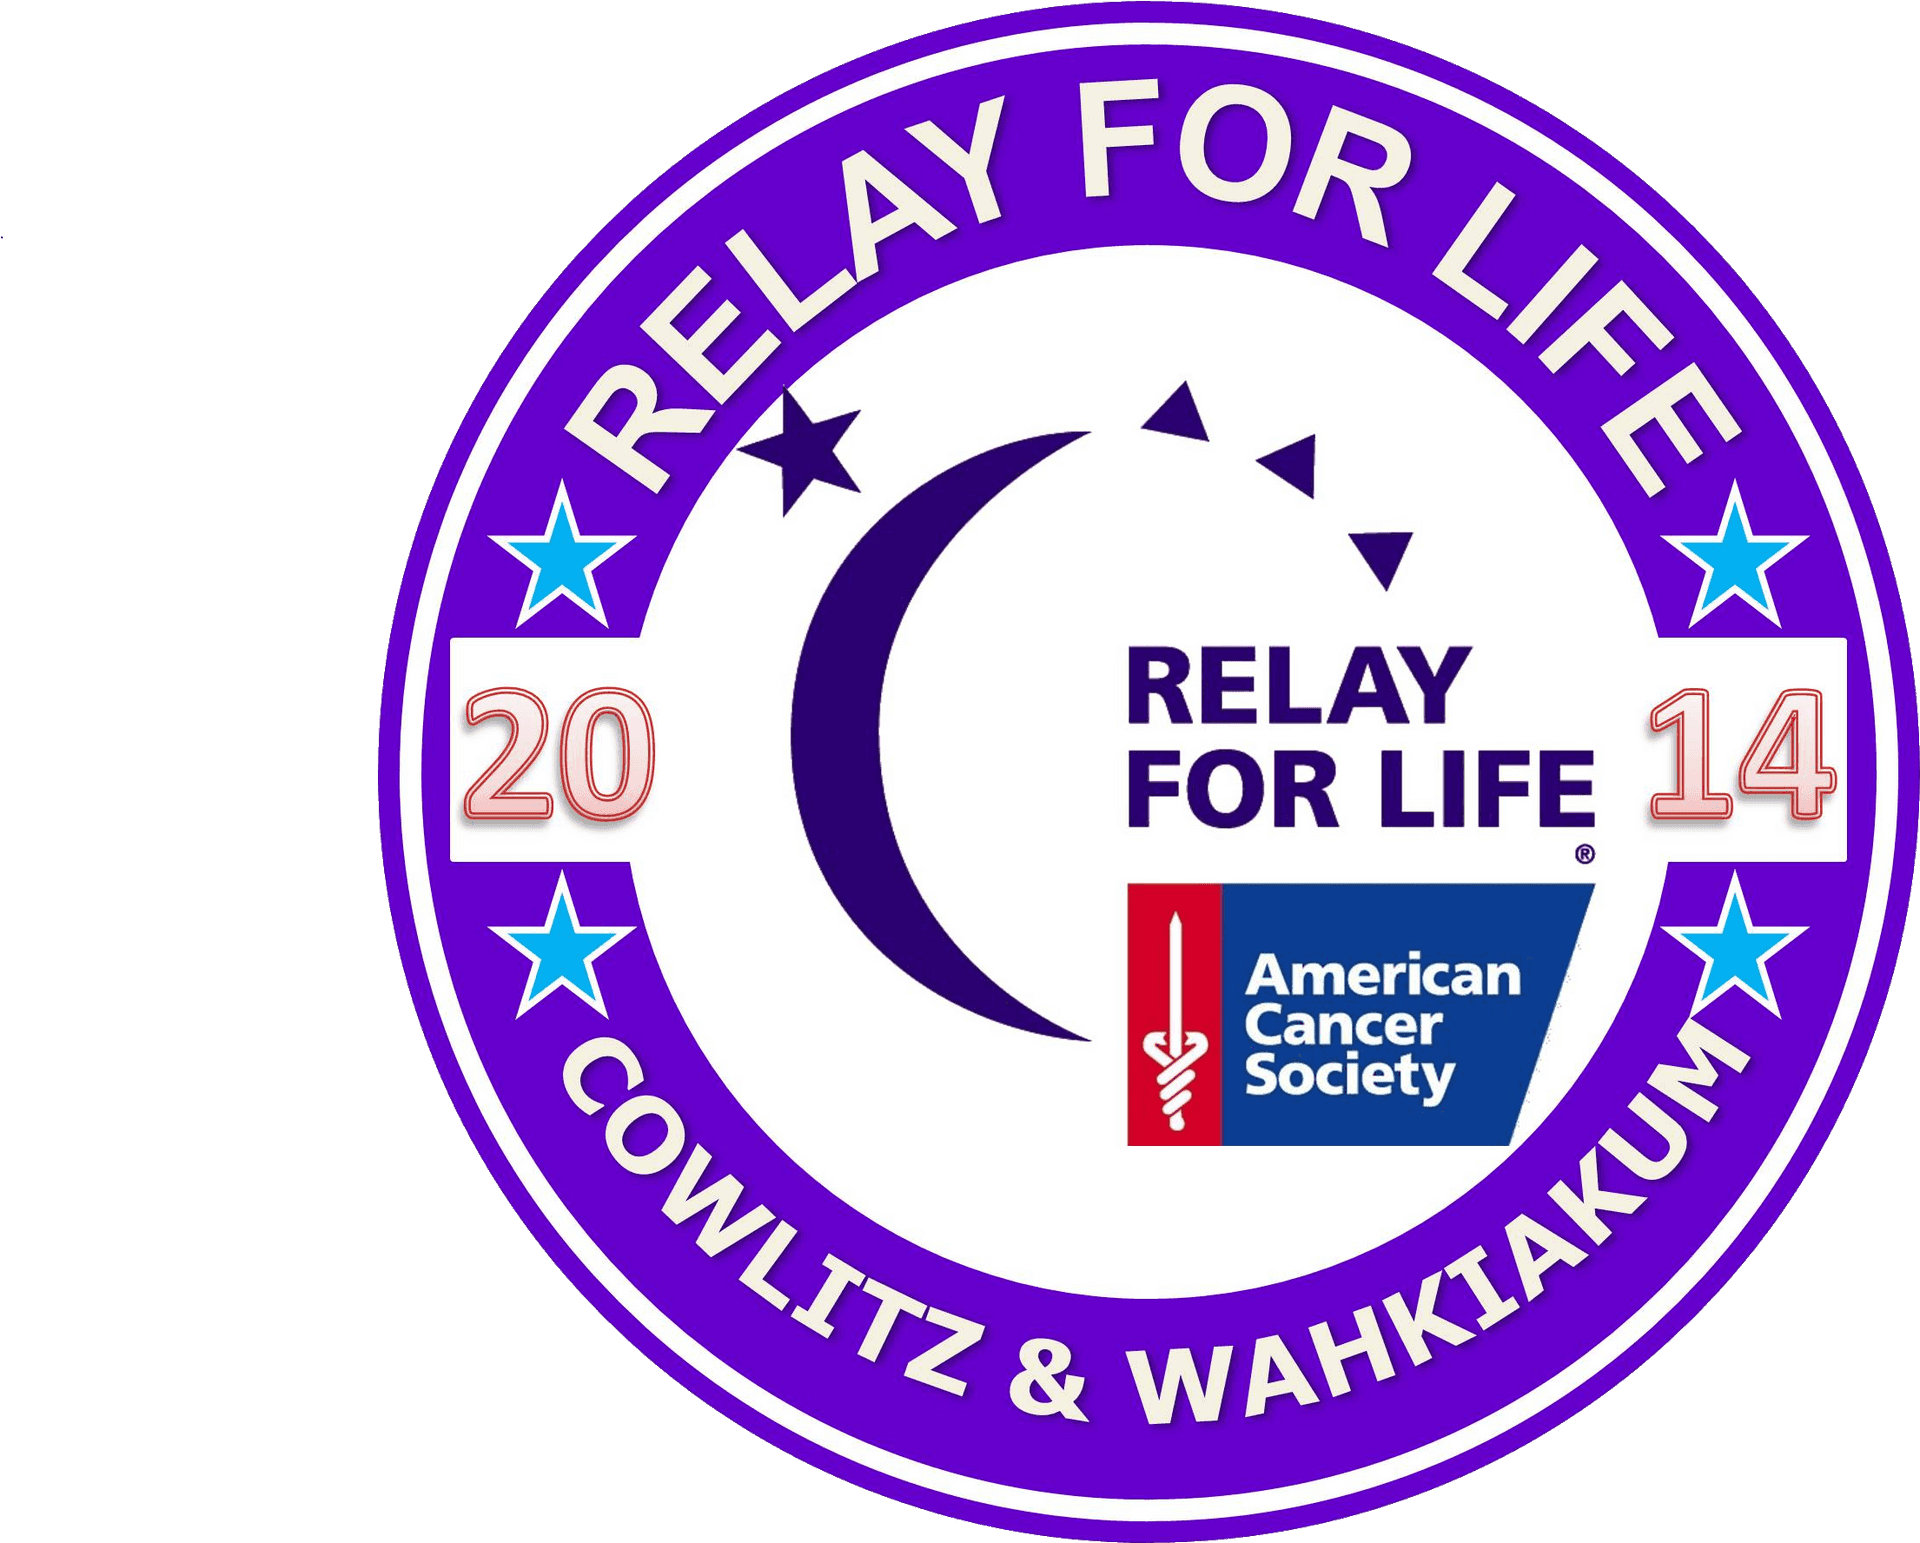 Download Relay For Life2014 Event Logo | Wallpapers.com